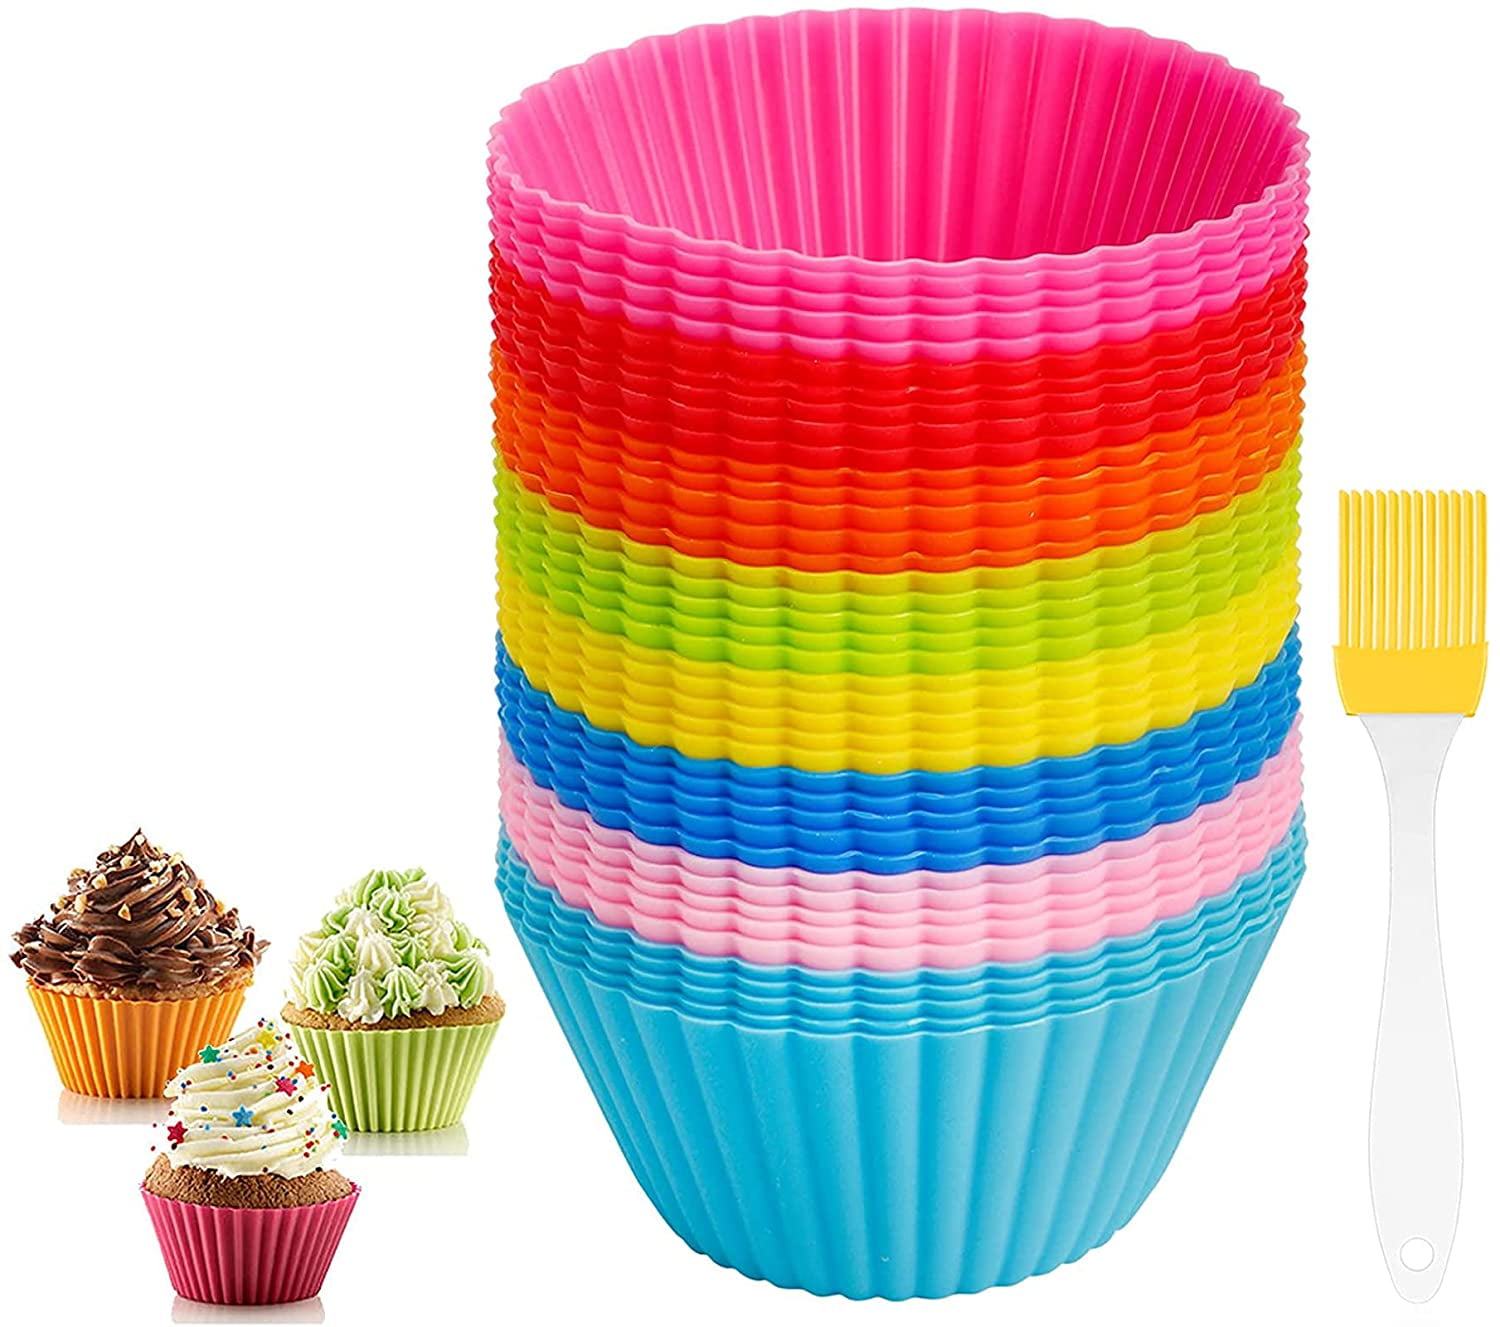 Silicone Muffin Cups Baking Molds Reusable Cupcake Liners Nonstick 12/24/36 Pack